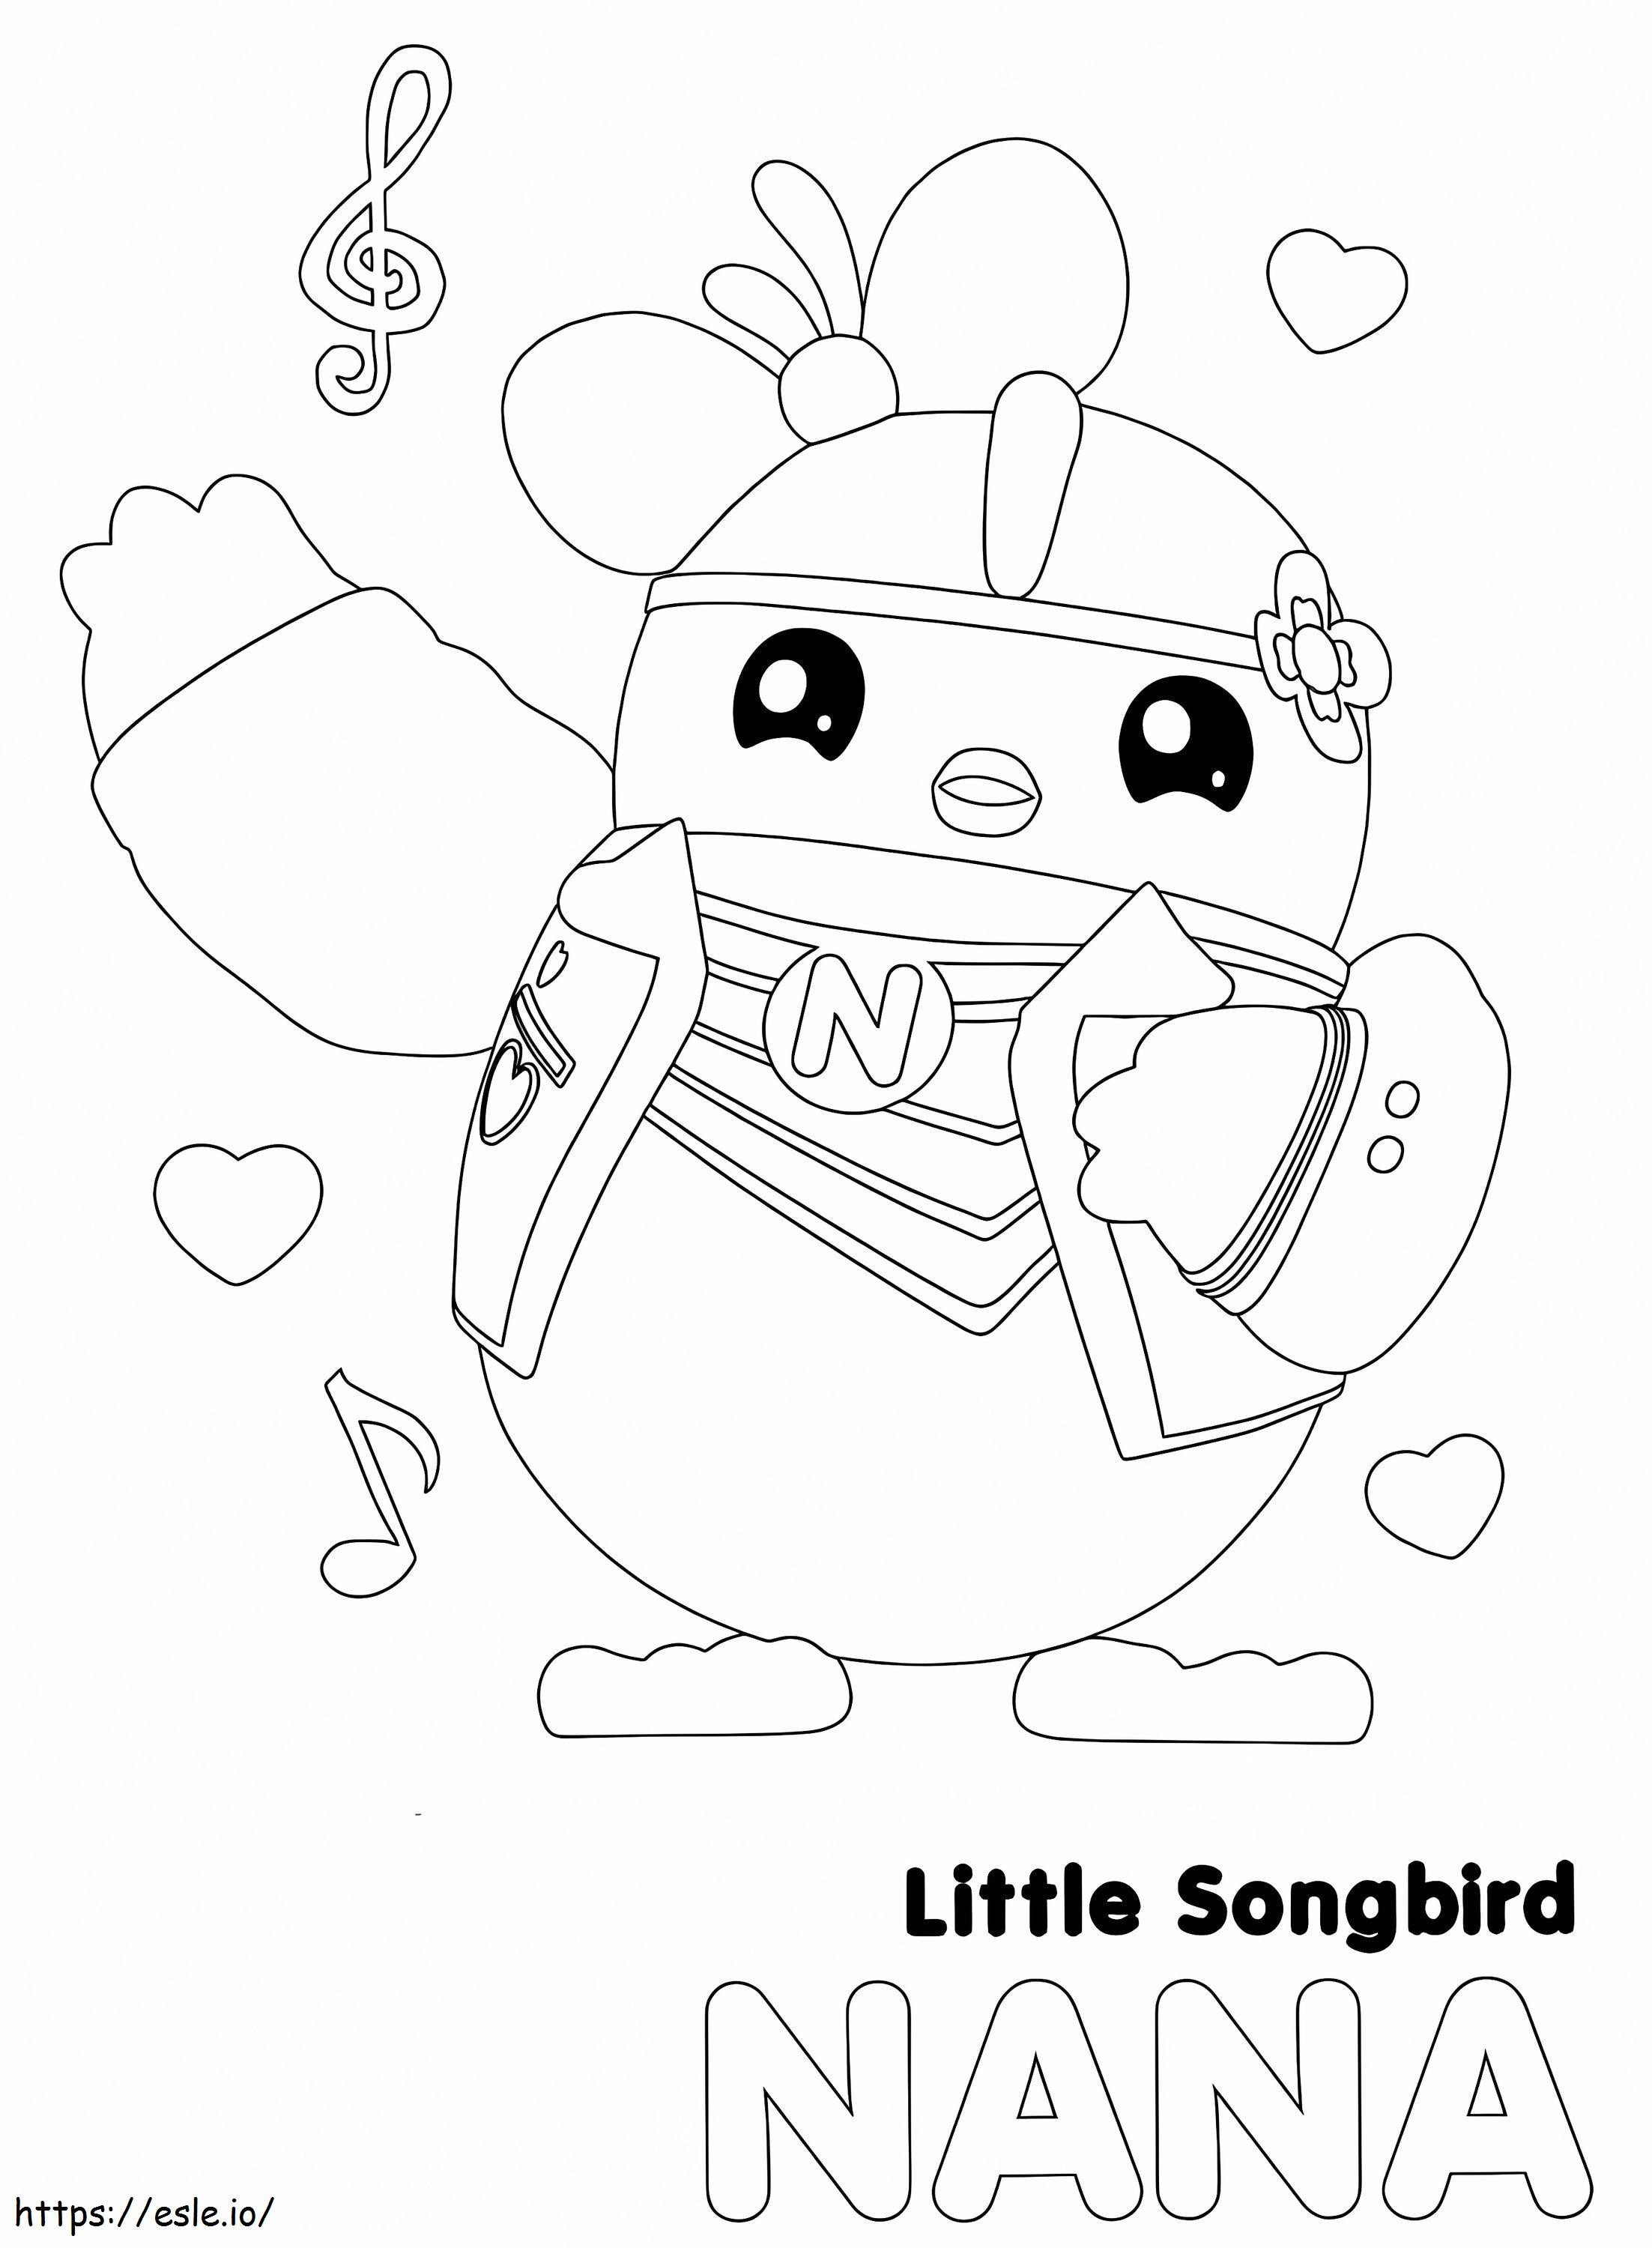 Little Songbird Nana coloring page